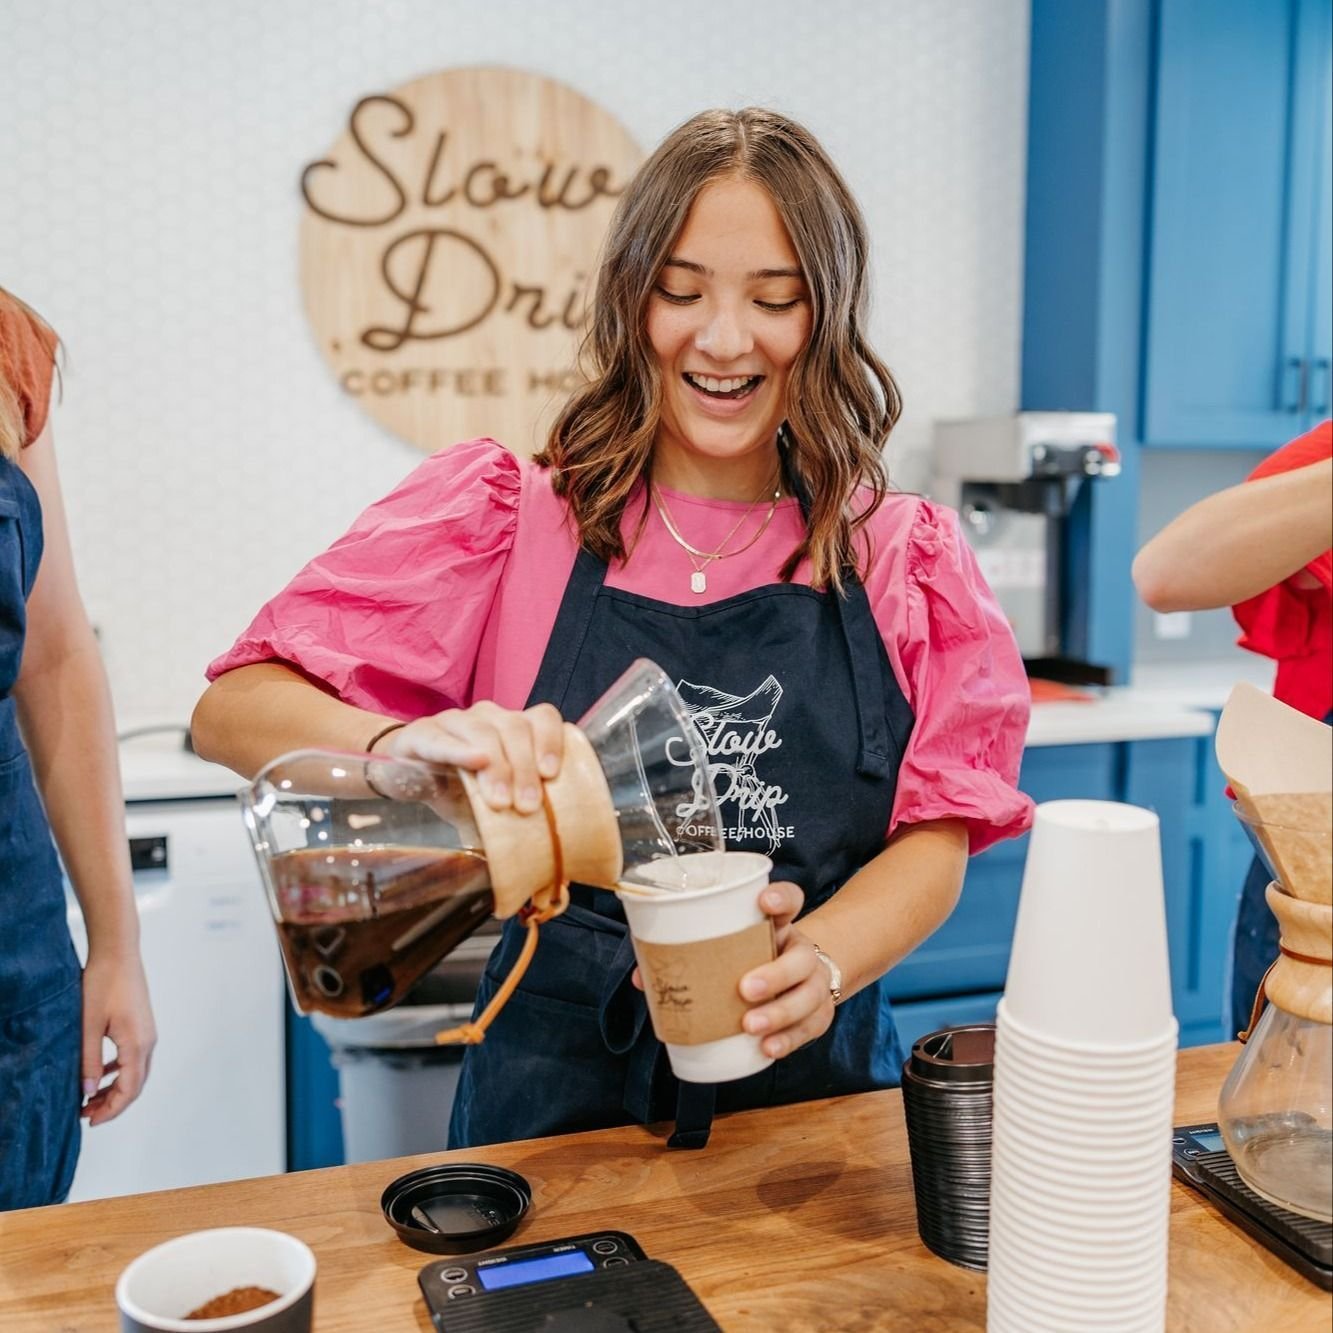 We're this happy to pour you a cup of free coffee this morning. 
Slow Drip happening this morning from 8-11am in the Fireside Cafe.